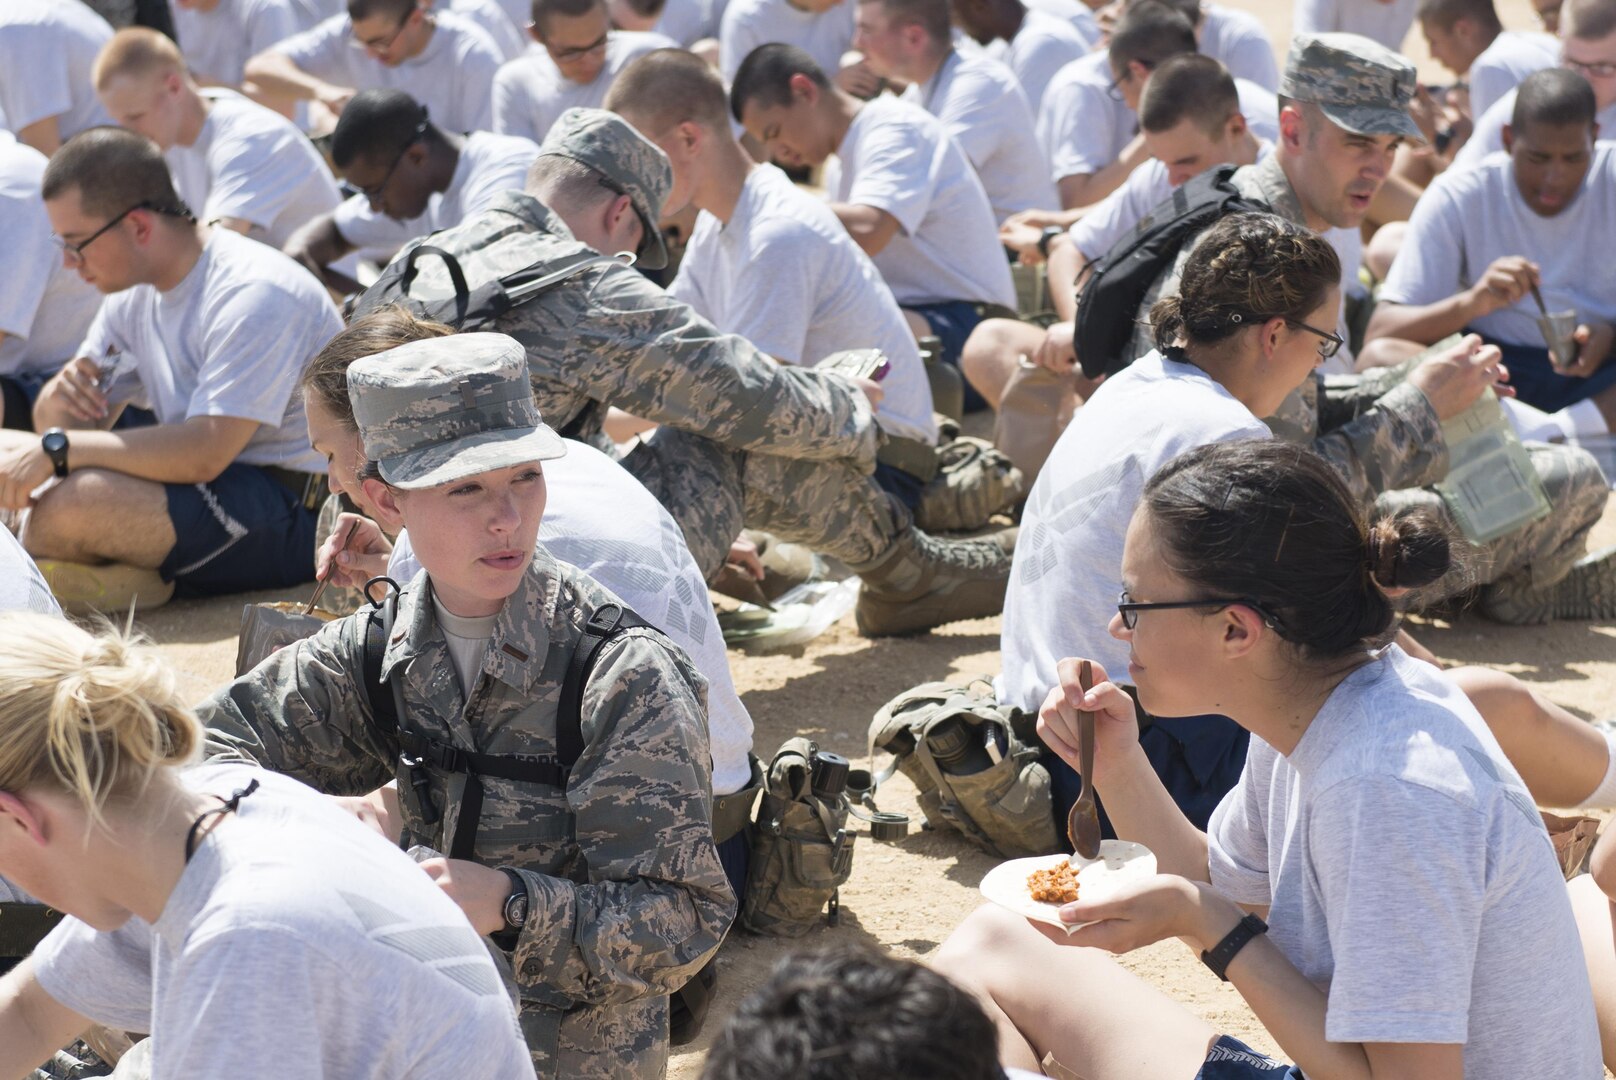 Chaplain candidates have lunch with basic military trainees during a tour of the Basic Expeditionary Airmen Skills Training at Joint Base San Antonio-Lackland, Texas, July 5, 2017. The tour was part of the Chaplain Candidate Intensive Internship. (U.S. Air Force photo by Senior Airman Krystal Wright)